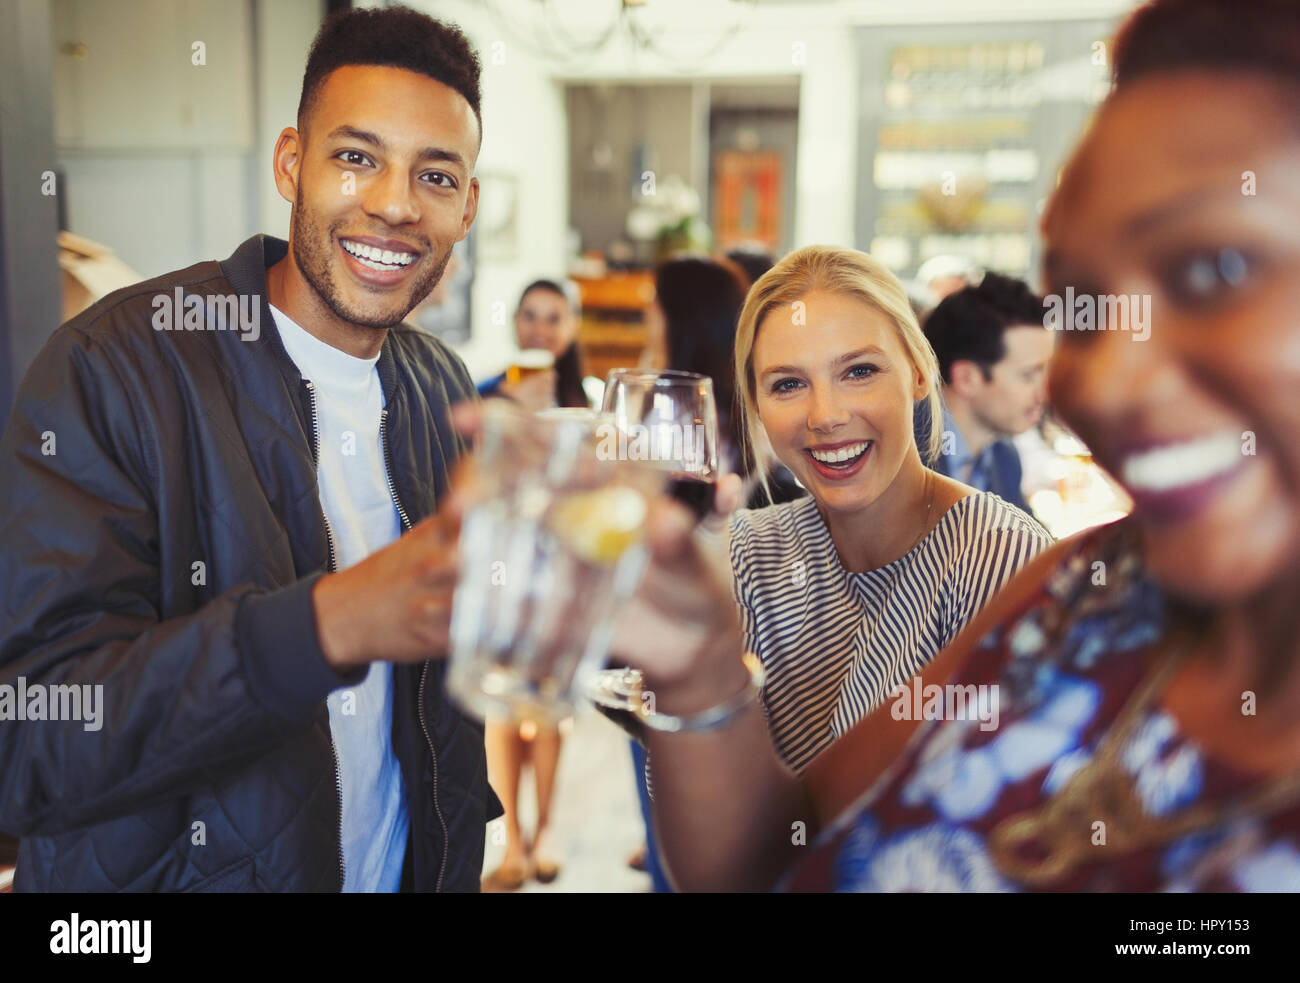 Portrait smiling man drinking with friends in bar Stock Photo